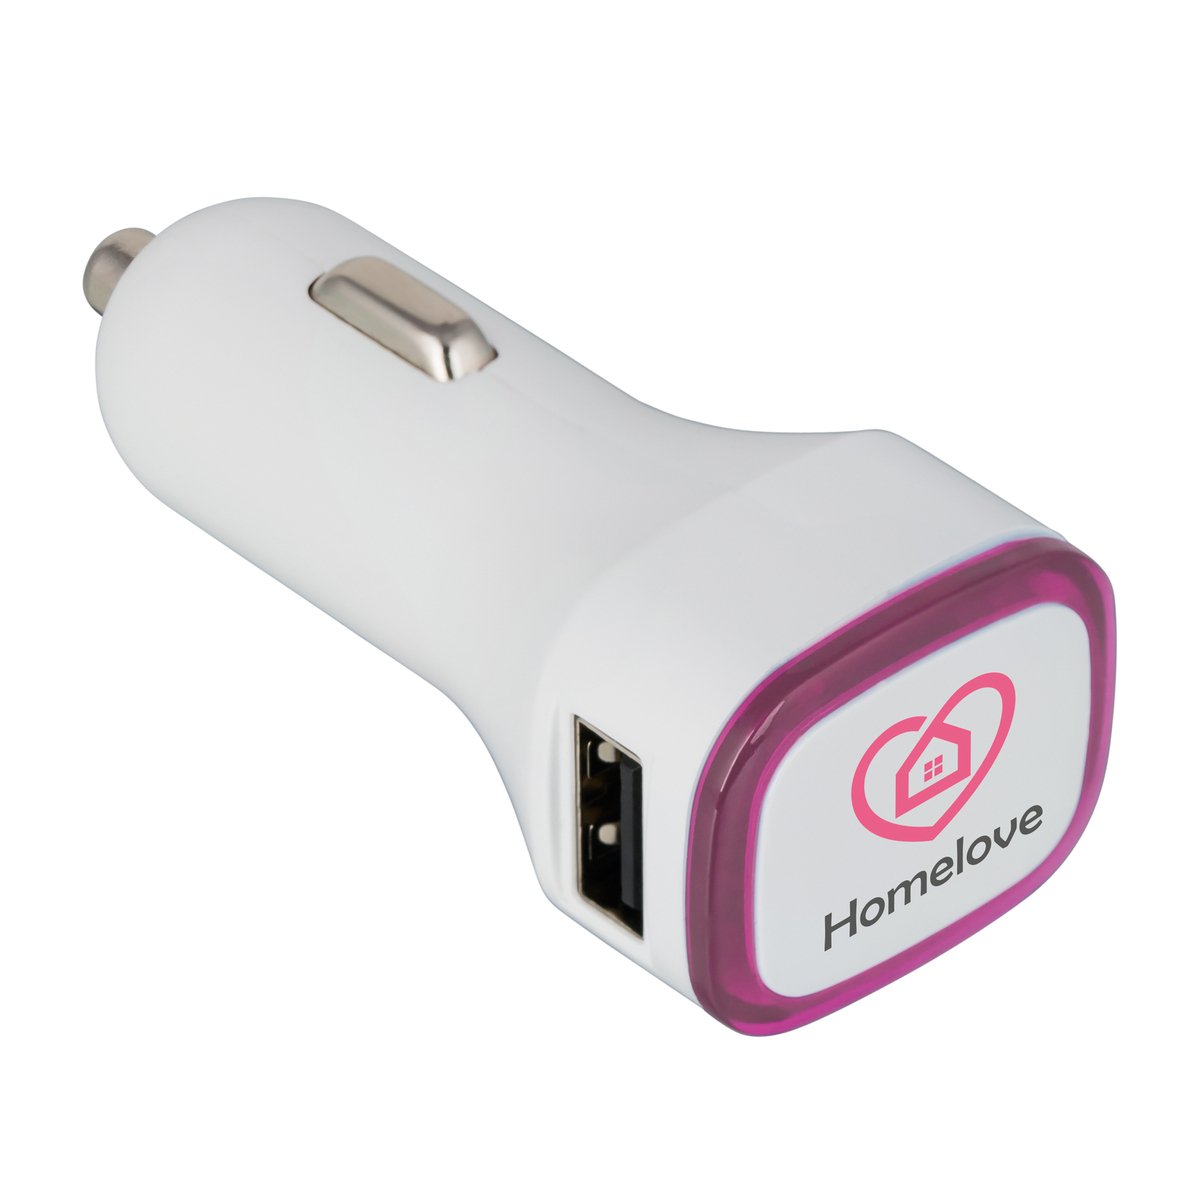 USB car charger adapter COLLECTION 500 magenta